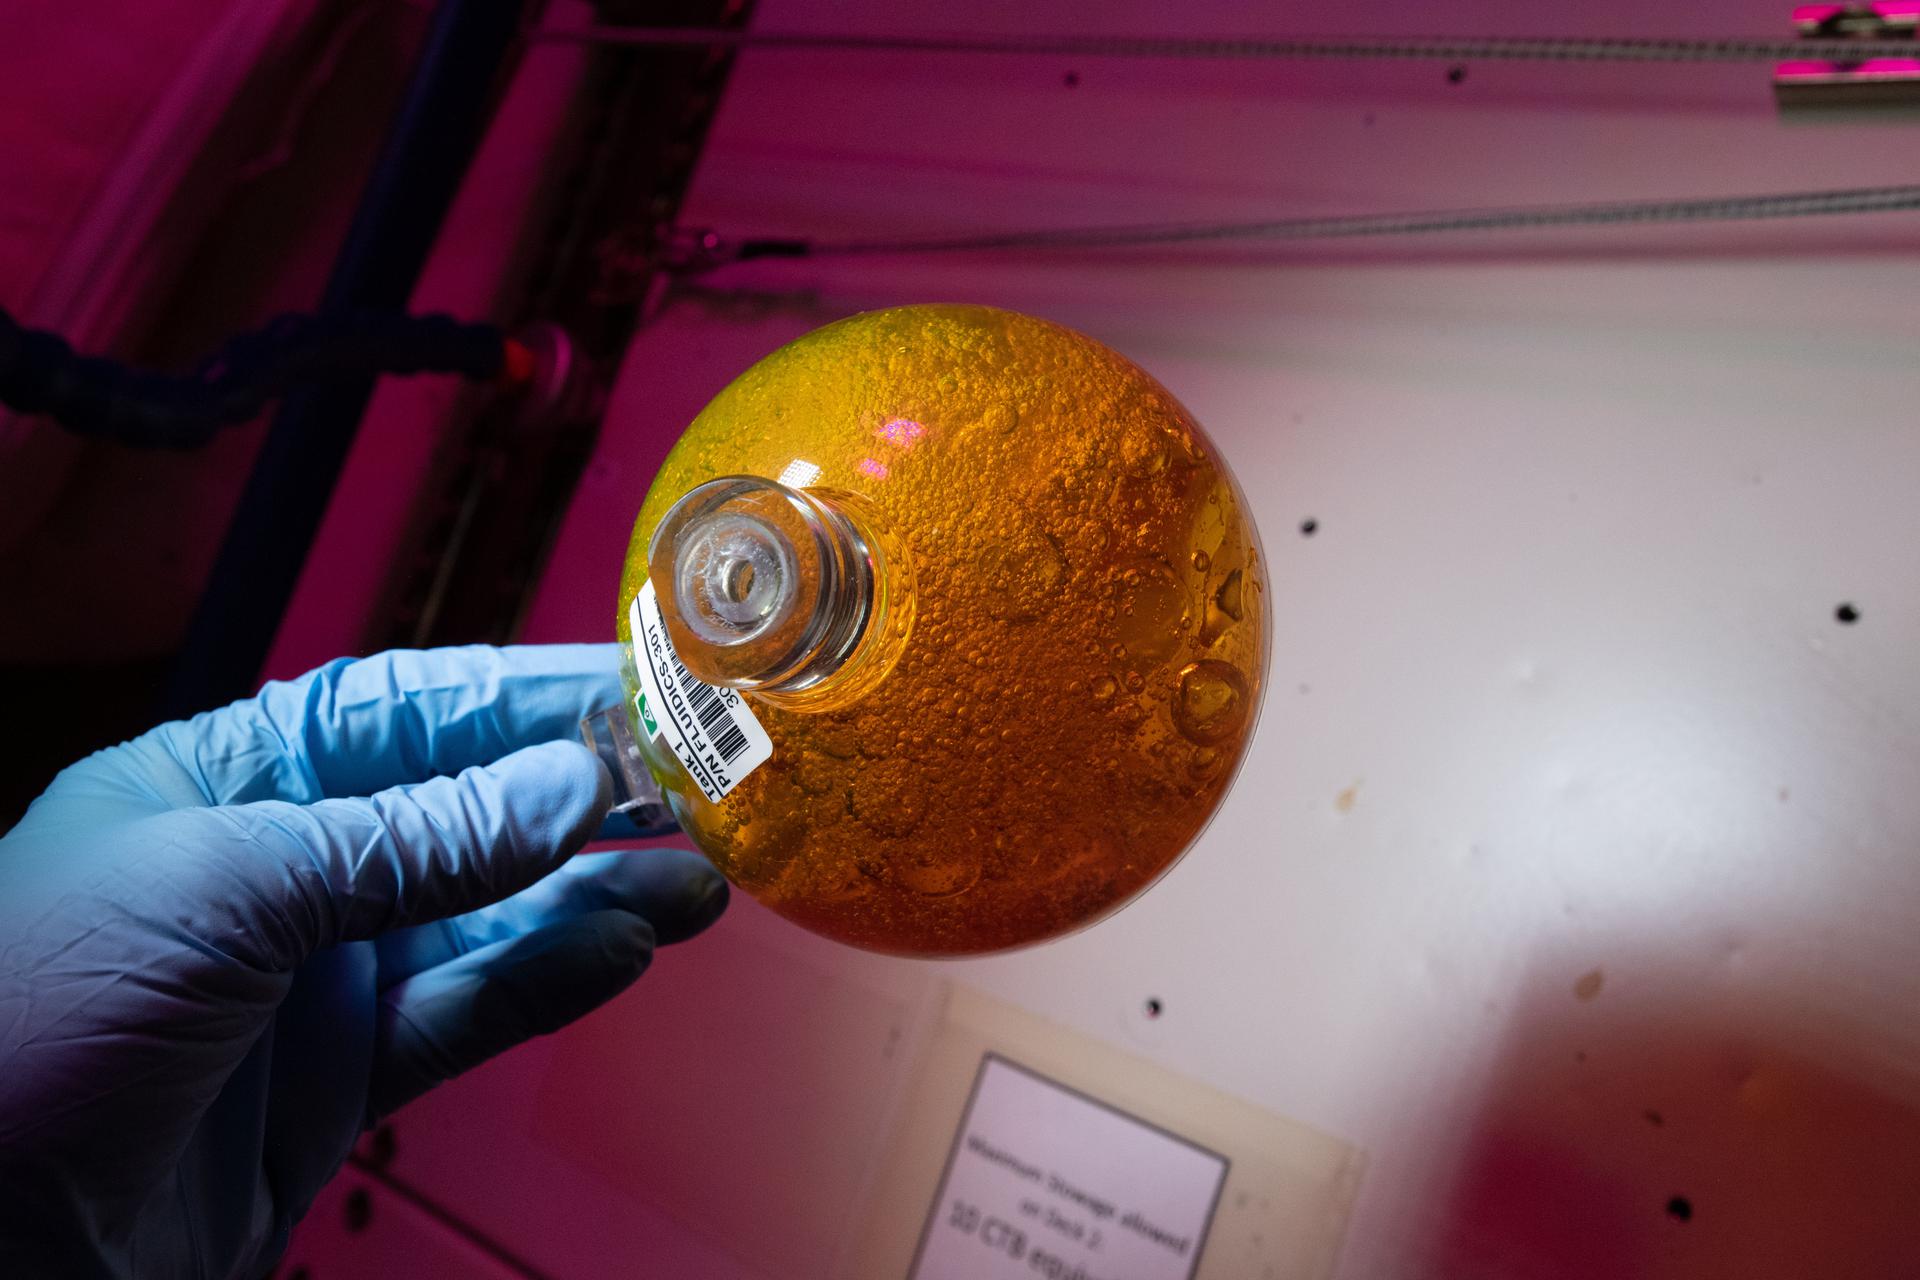 image of a sphere containing an orange fluid with bubbles inside